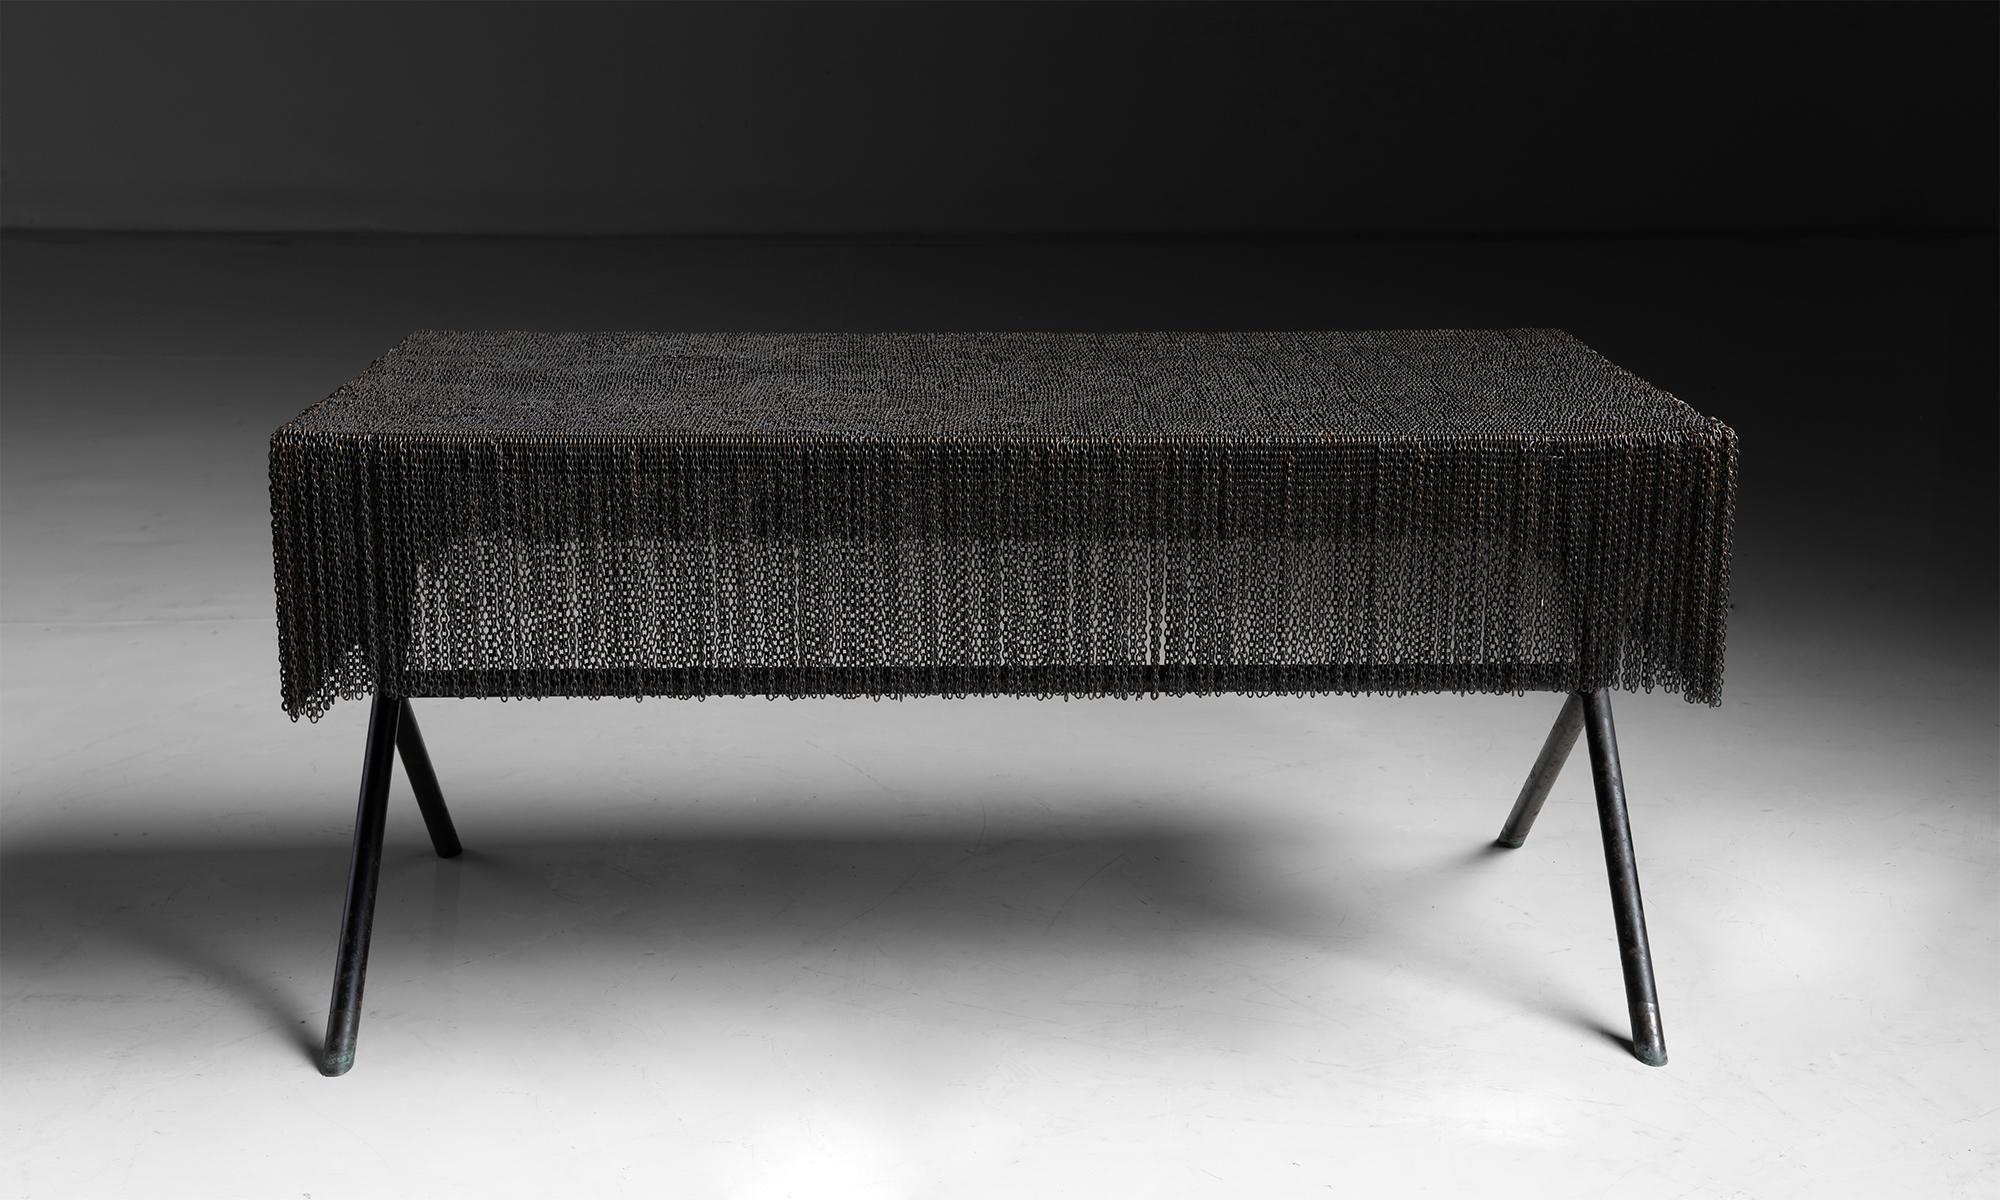 English Chain Mail Coffee Table by Solange Azagury Partridge, Made in England